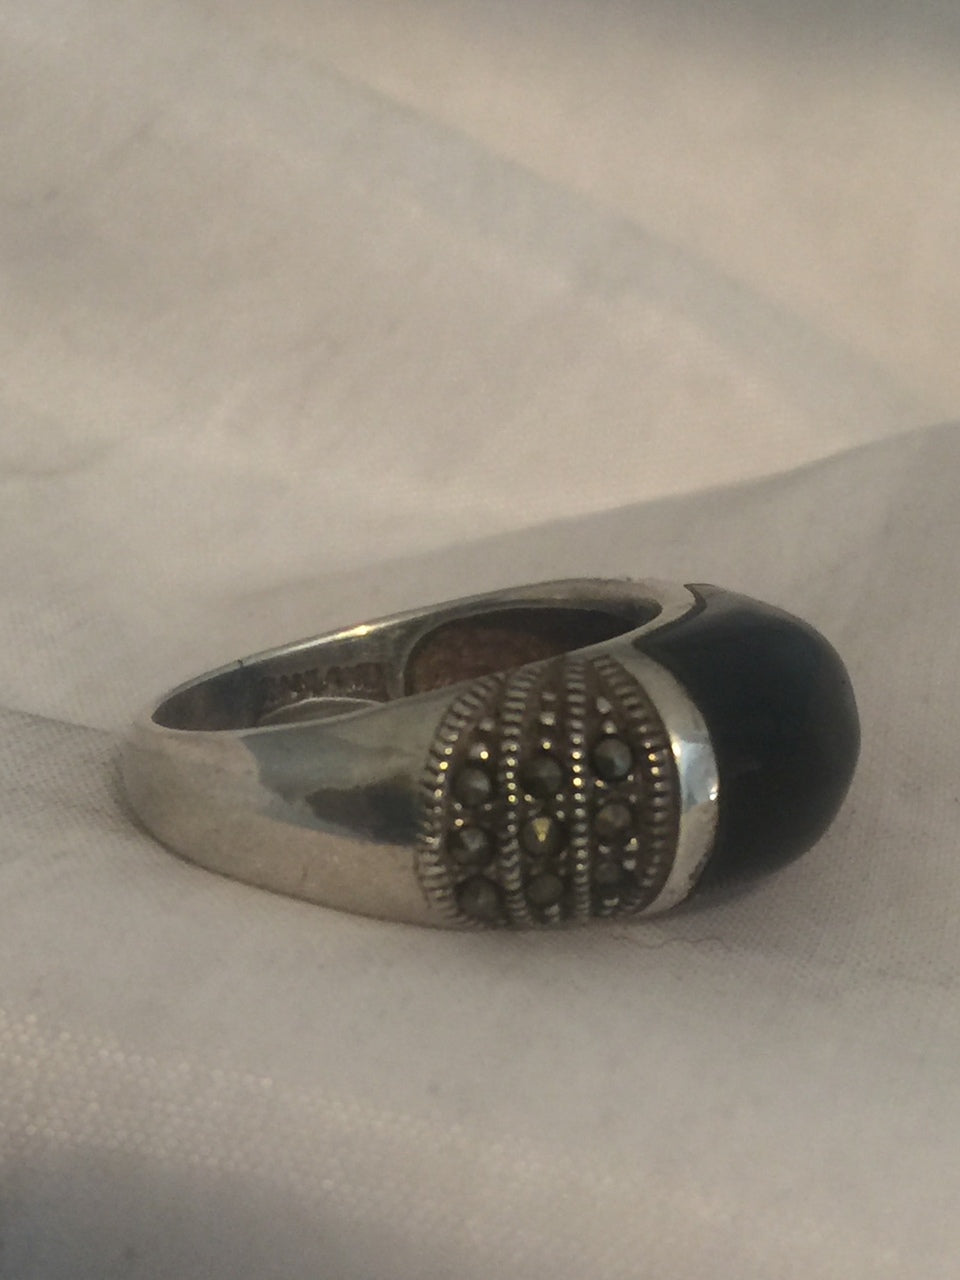 Vintage Sterling Silver Art Deco Onyx & Marcasite Band Ring Size 5.75  4.9g